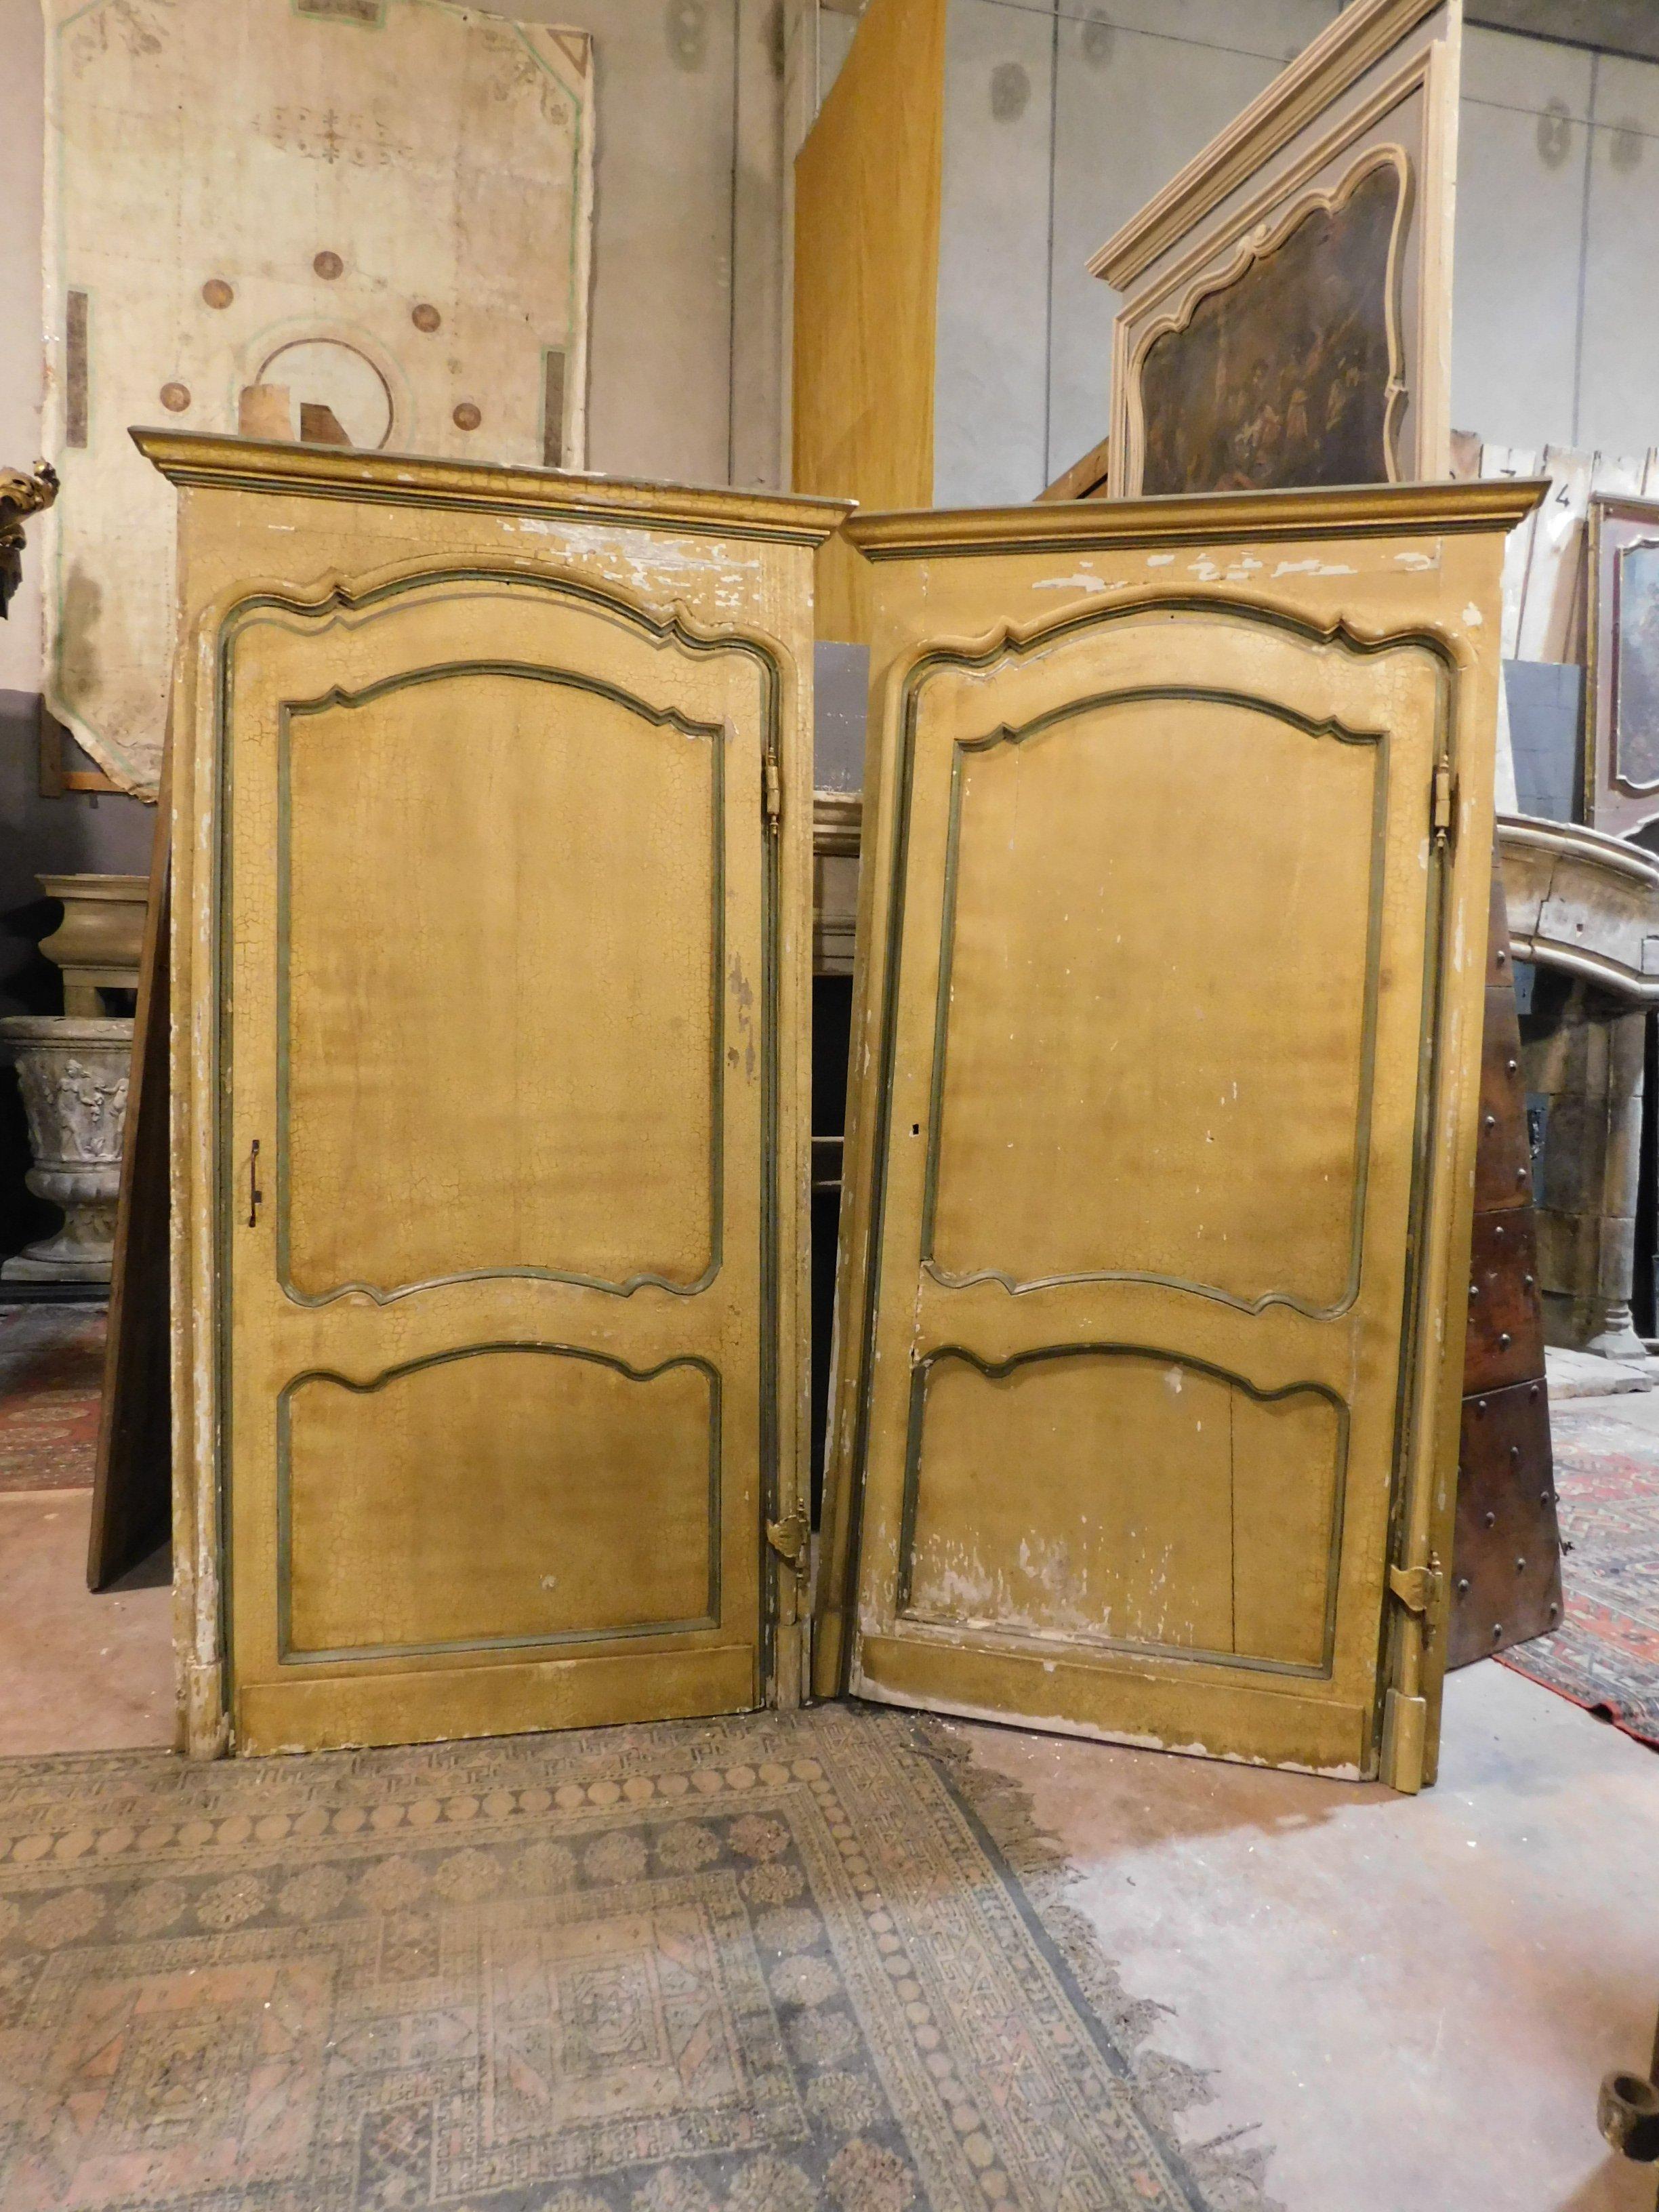 Antique pair of lacquered doors, yellow with green moles, with wavy sculpted panels and original frame, beautiful original gooseneck irons, built entirely by hand in the late 1700s for an important building in Italy.
With a finished panel also on